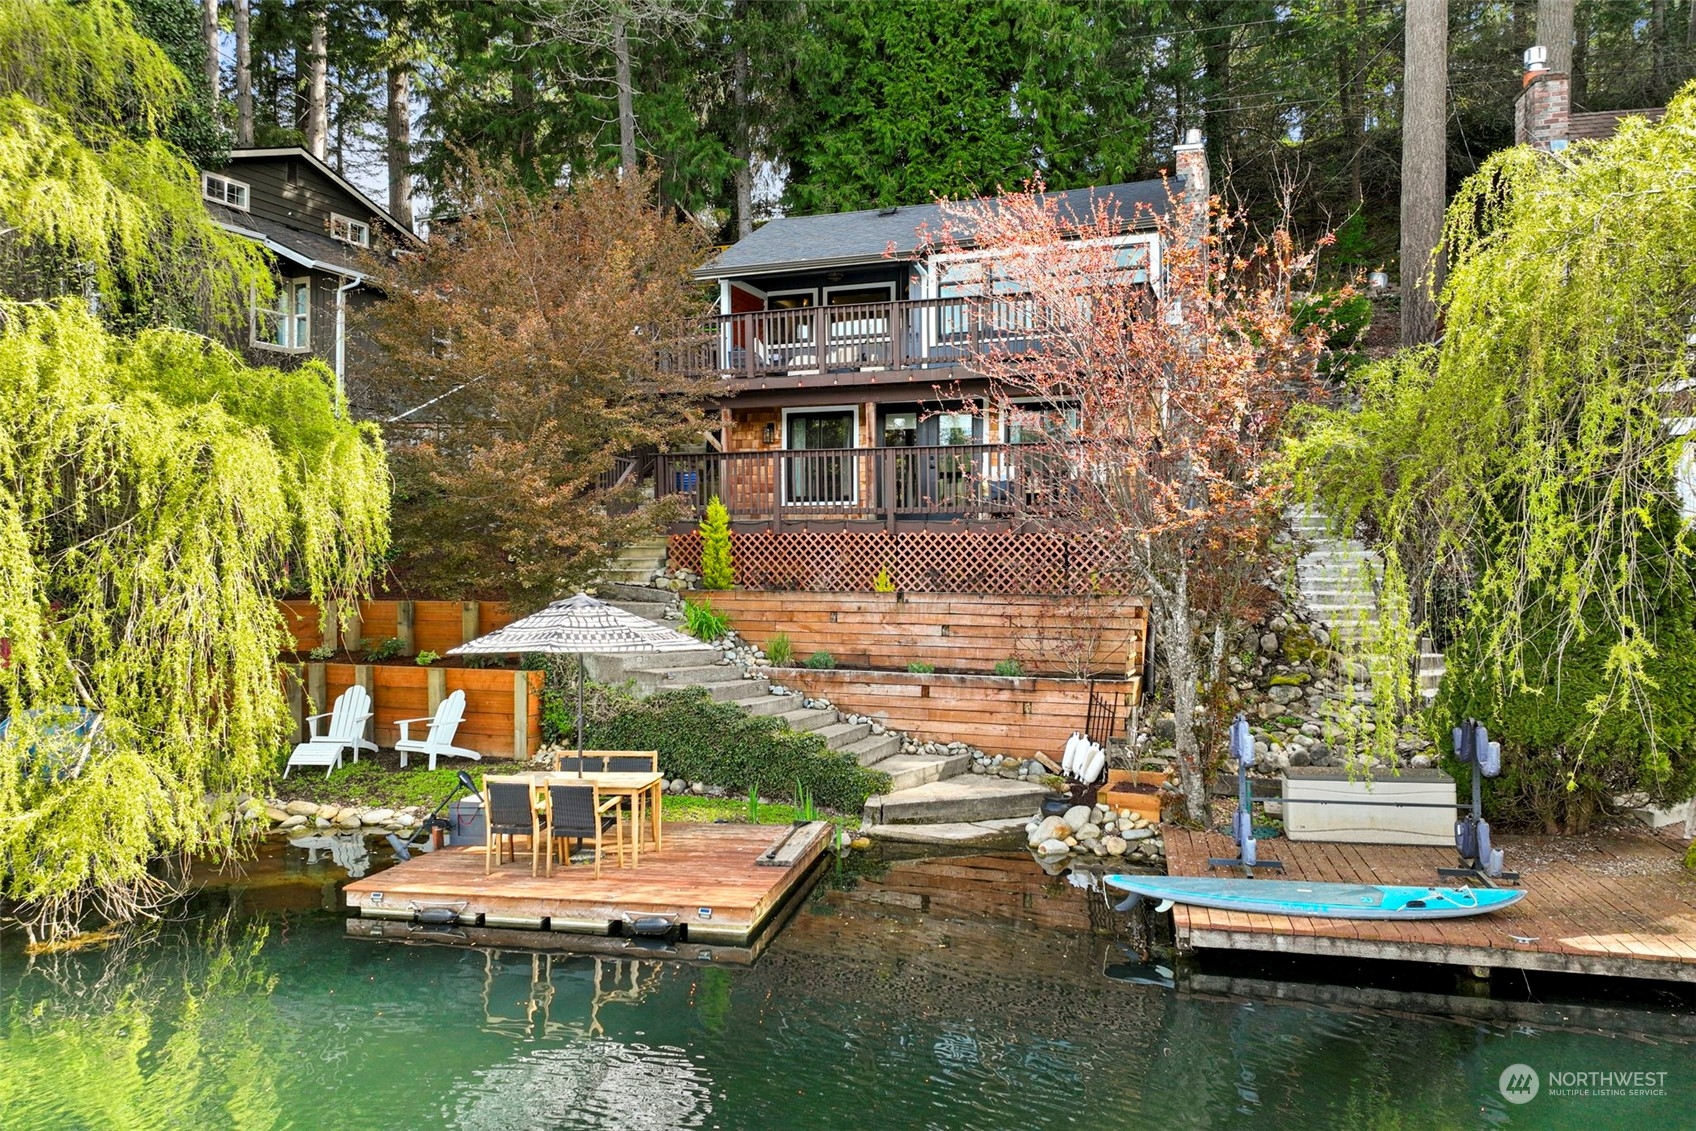 a view of house with swimming pool and outdoor seating